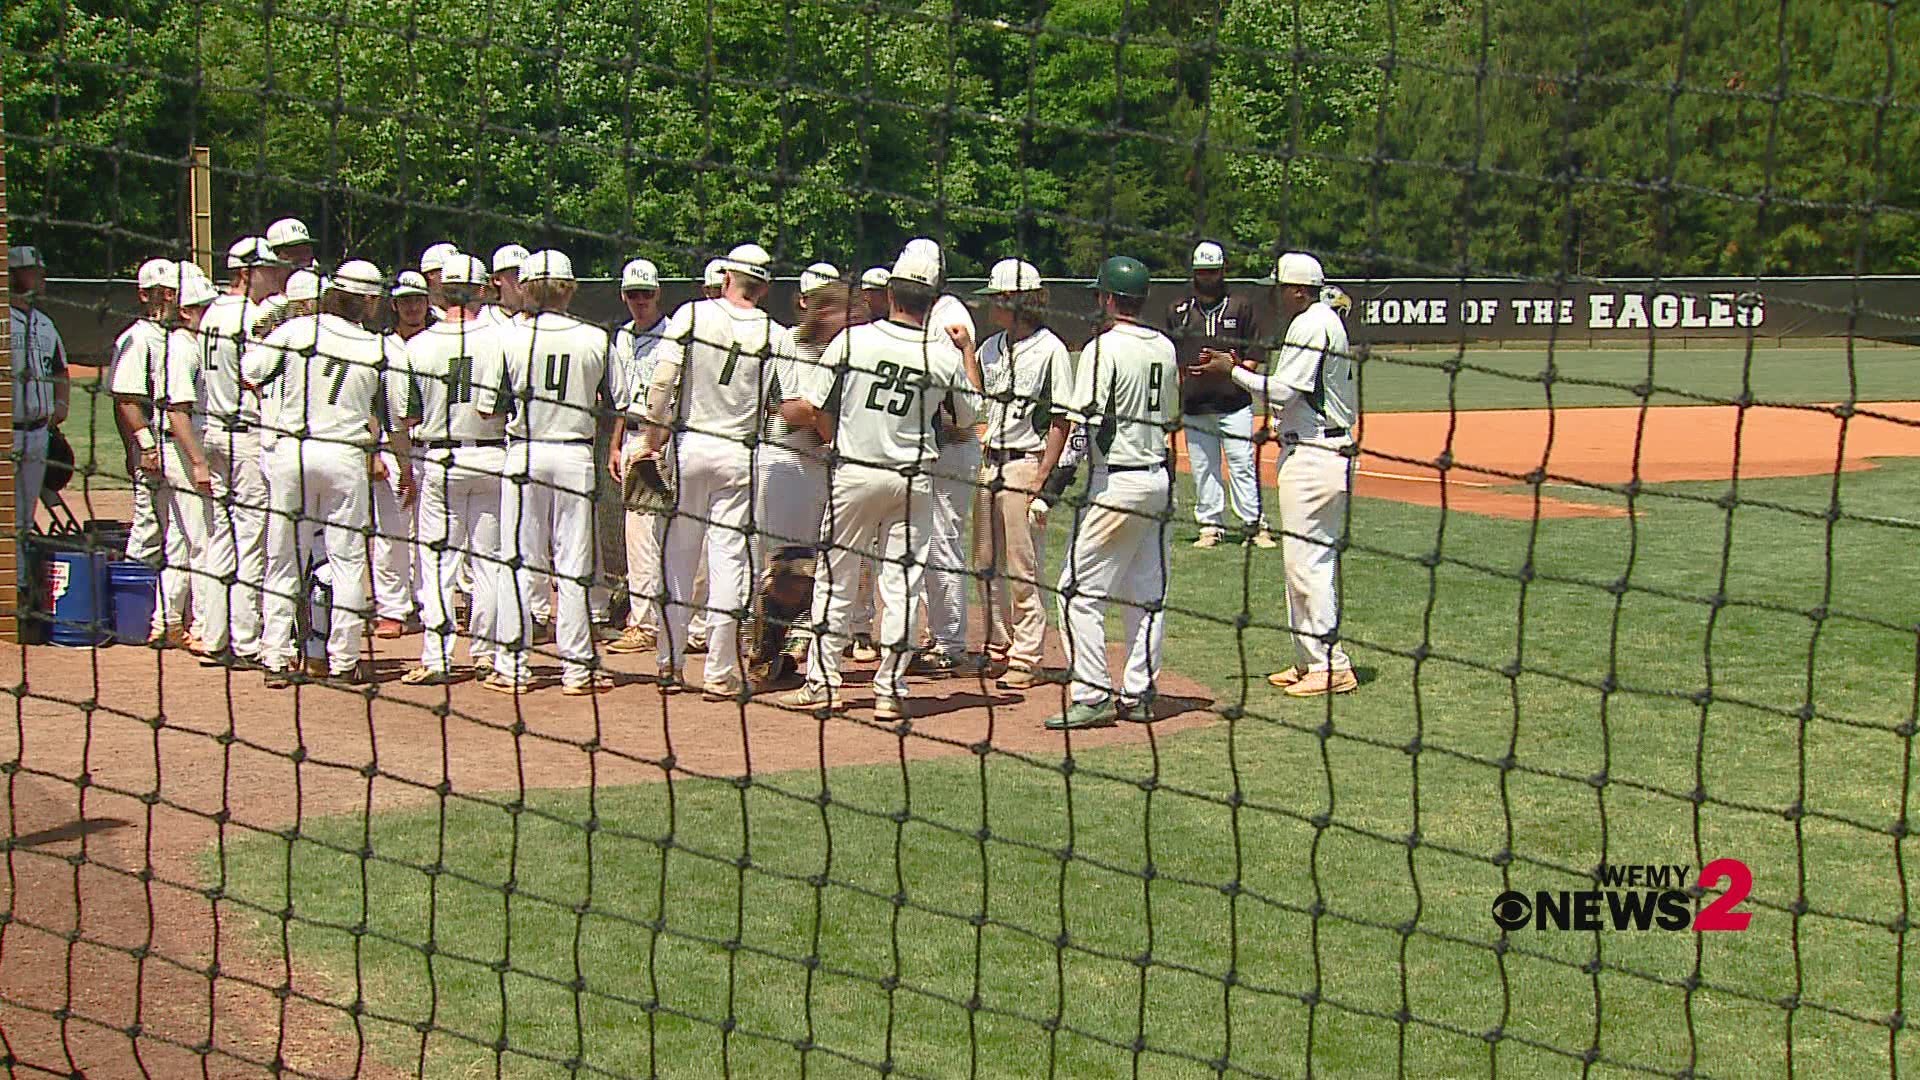 The Eagles took two from Westmoreland CC to advance to their Third Straight DIII World Series